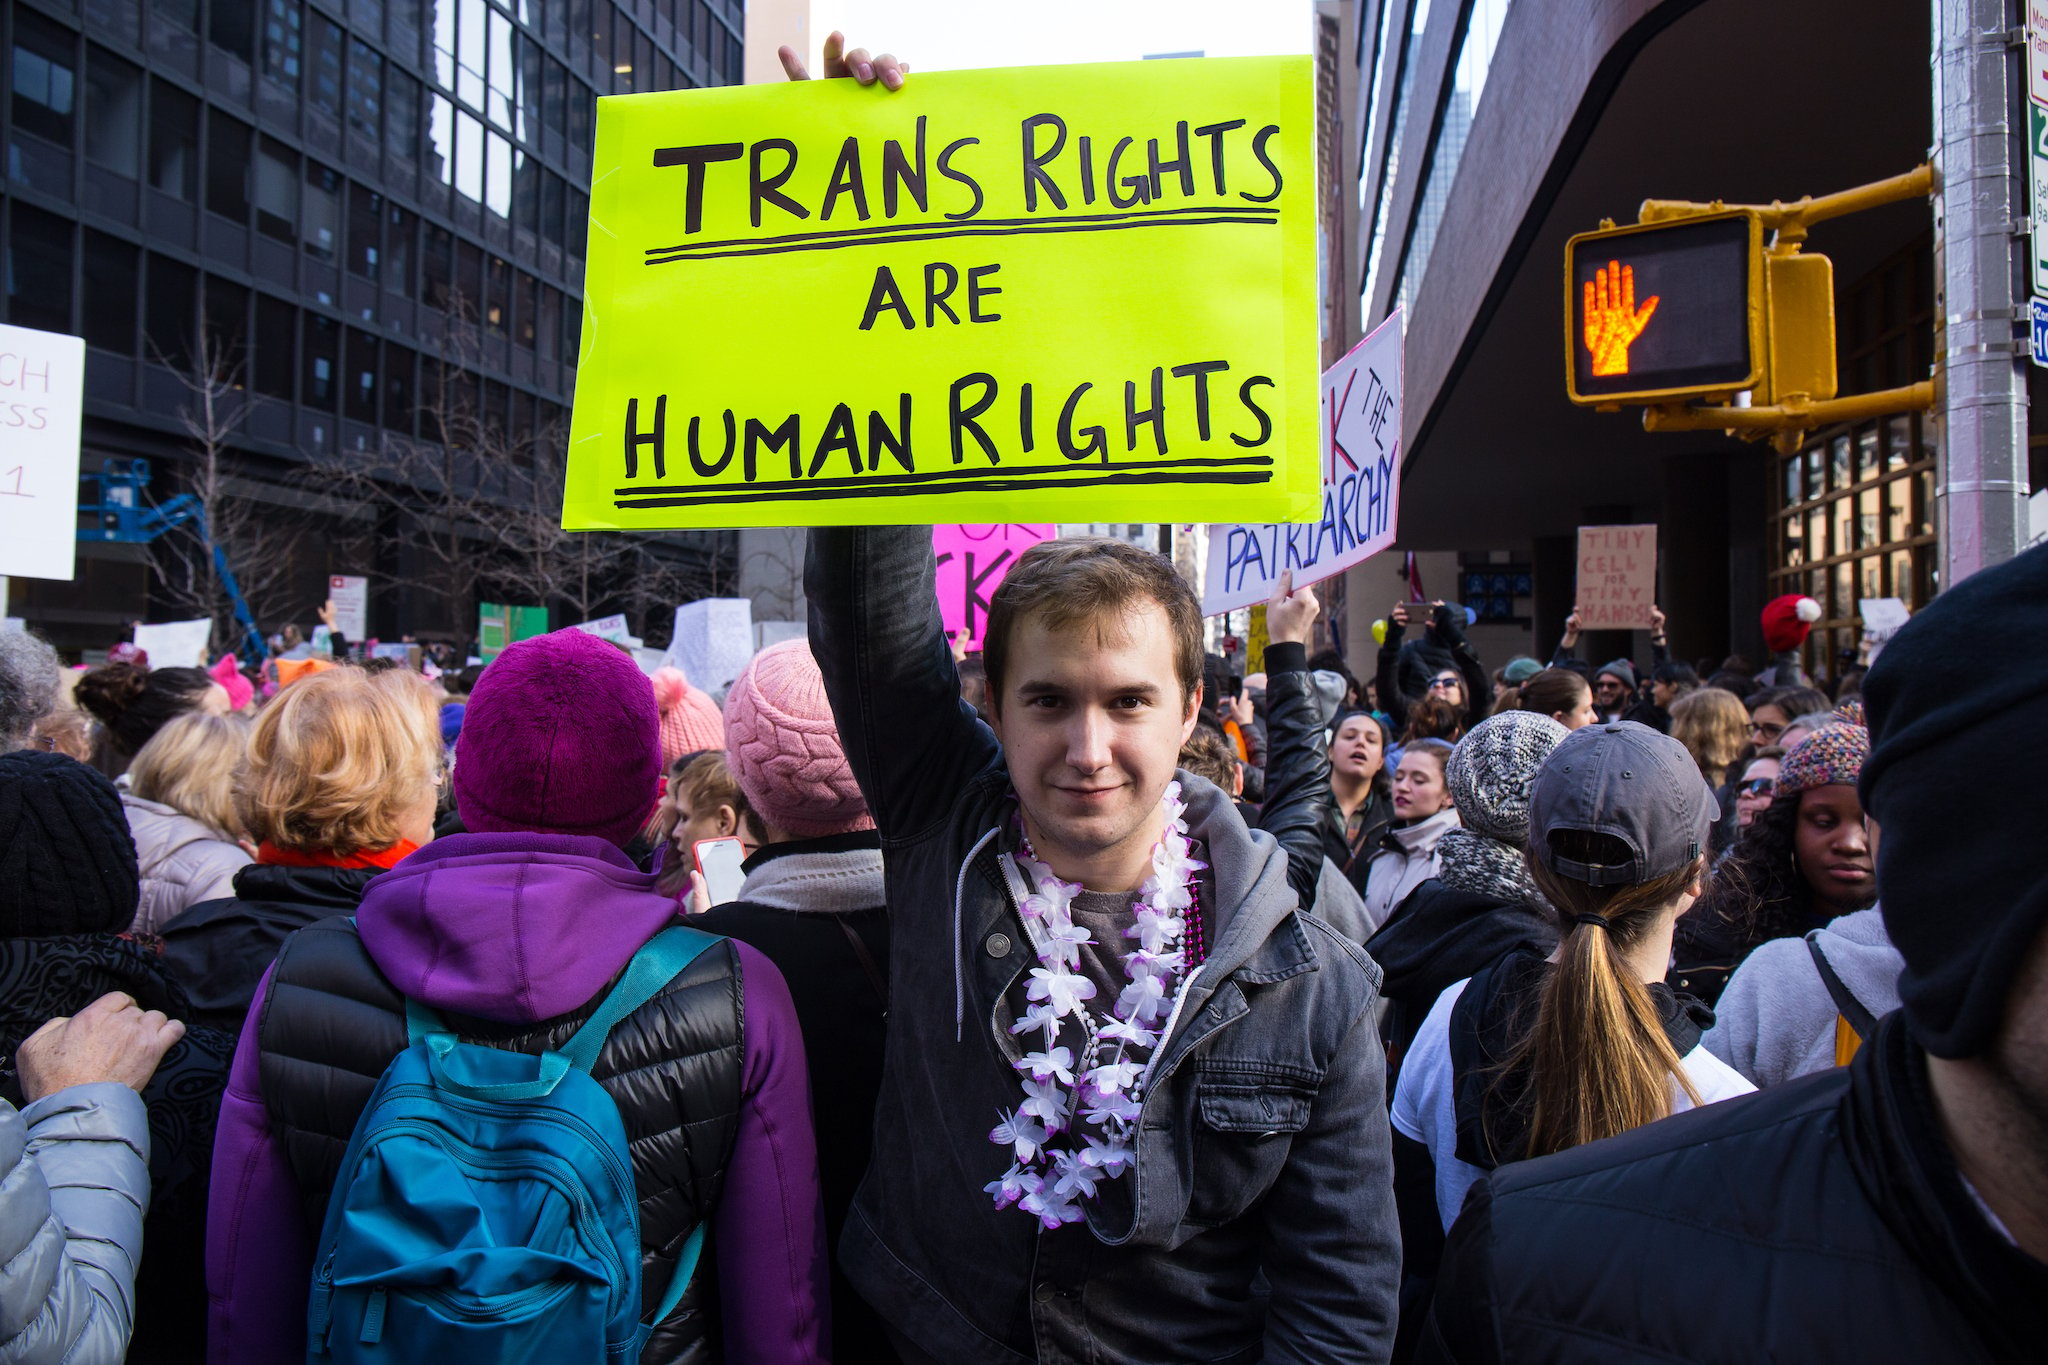 A man in a crowded, urban protest march turns away from the marchers to face the camera, smiling as he holds up a handwritten sign reading "Trans Rights are Human Rights."